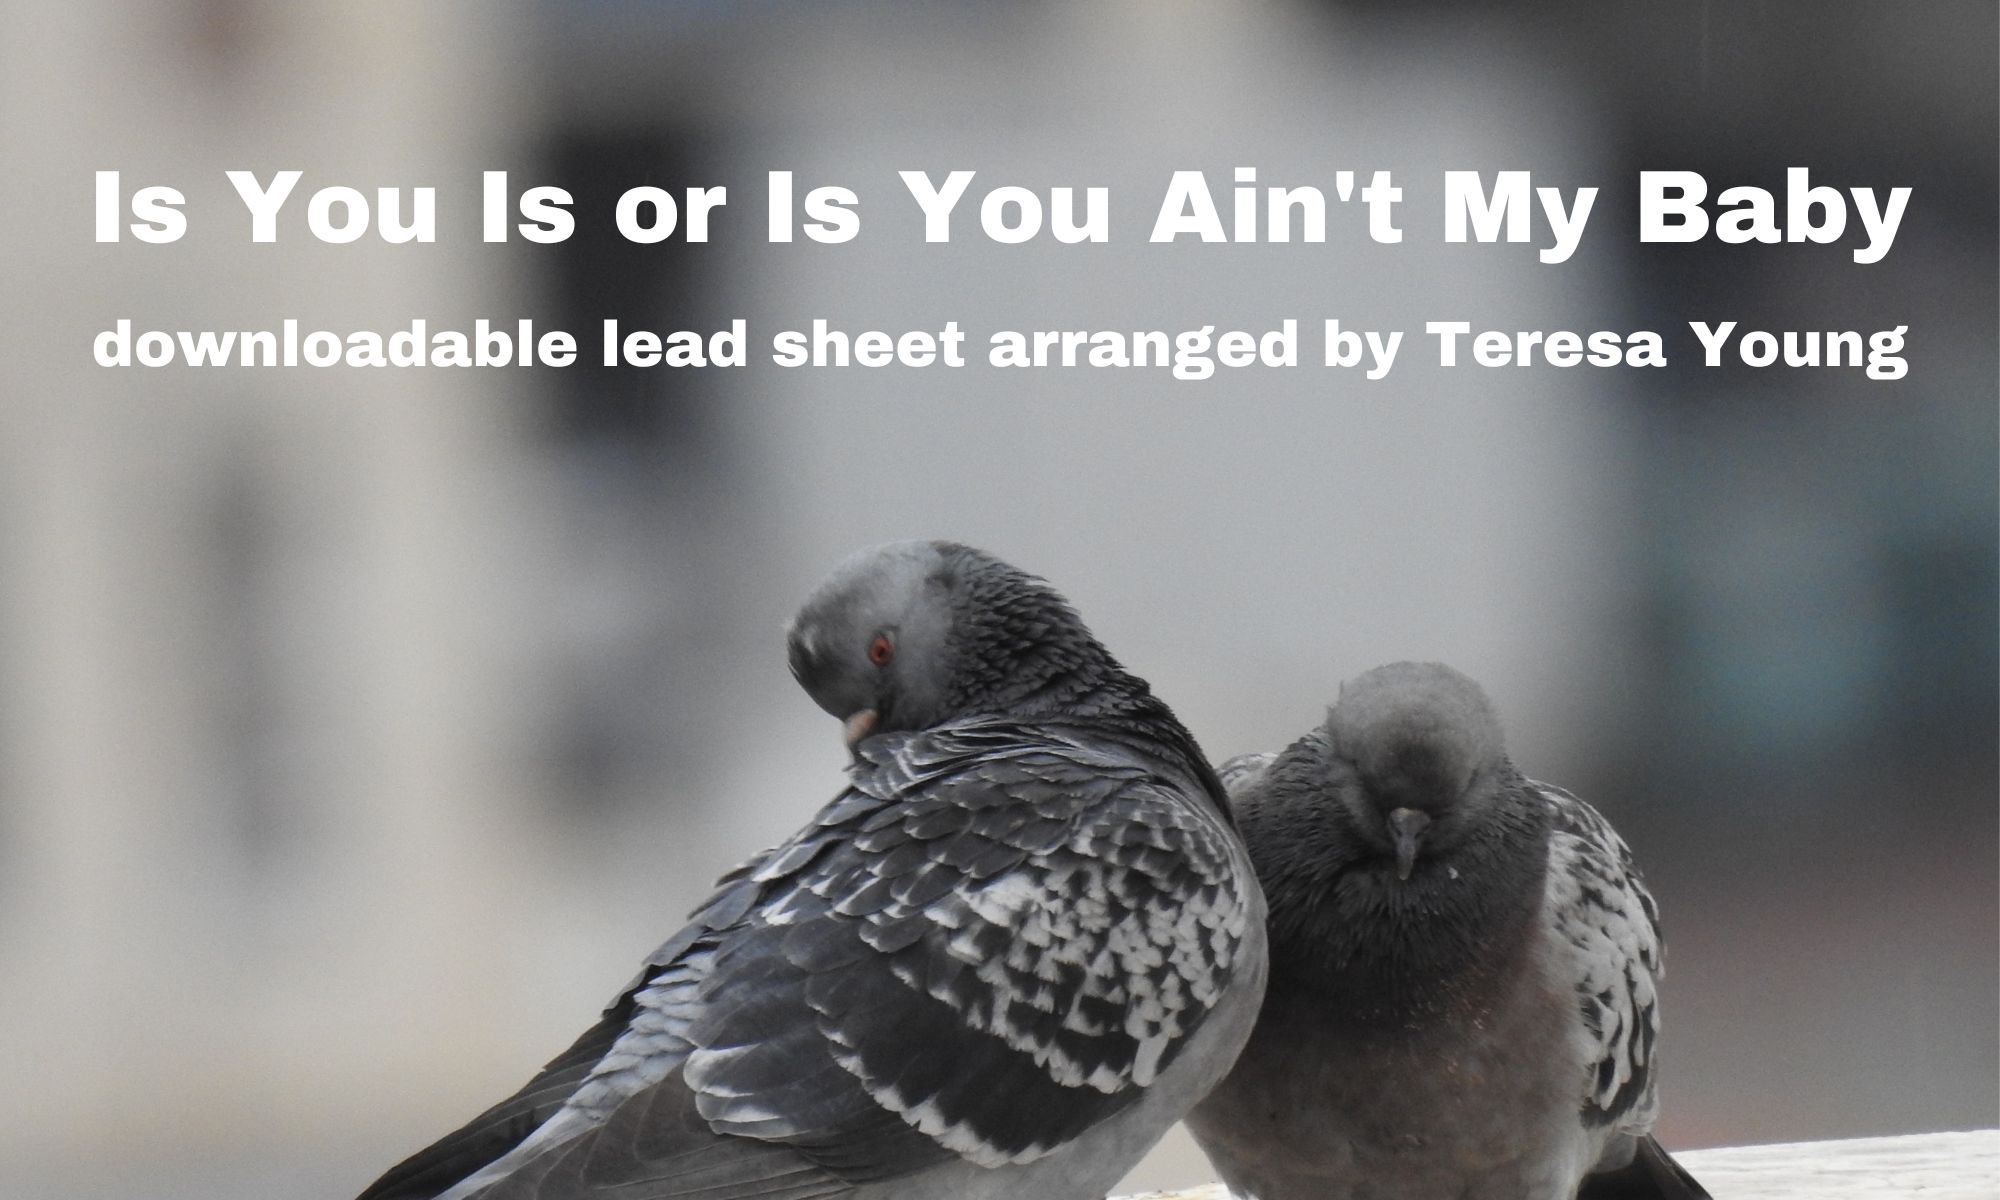 Is You Is or Is You Ain't My Baby lead sheet arr. Teresa Young